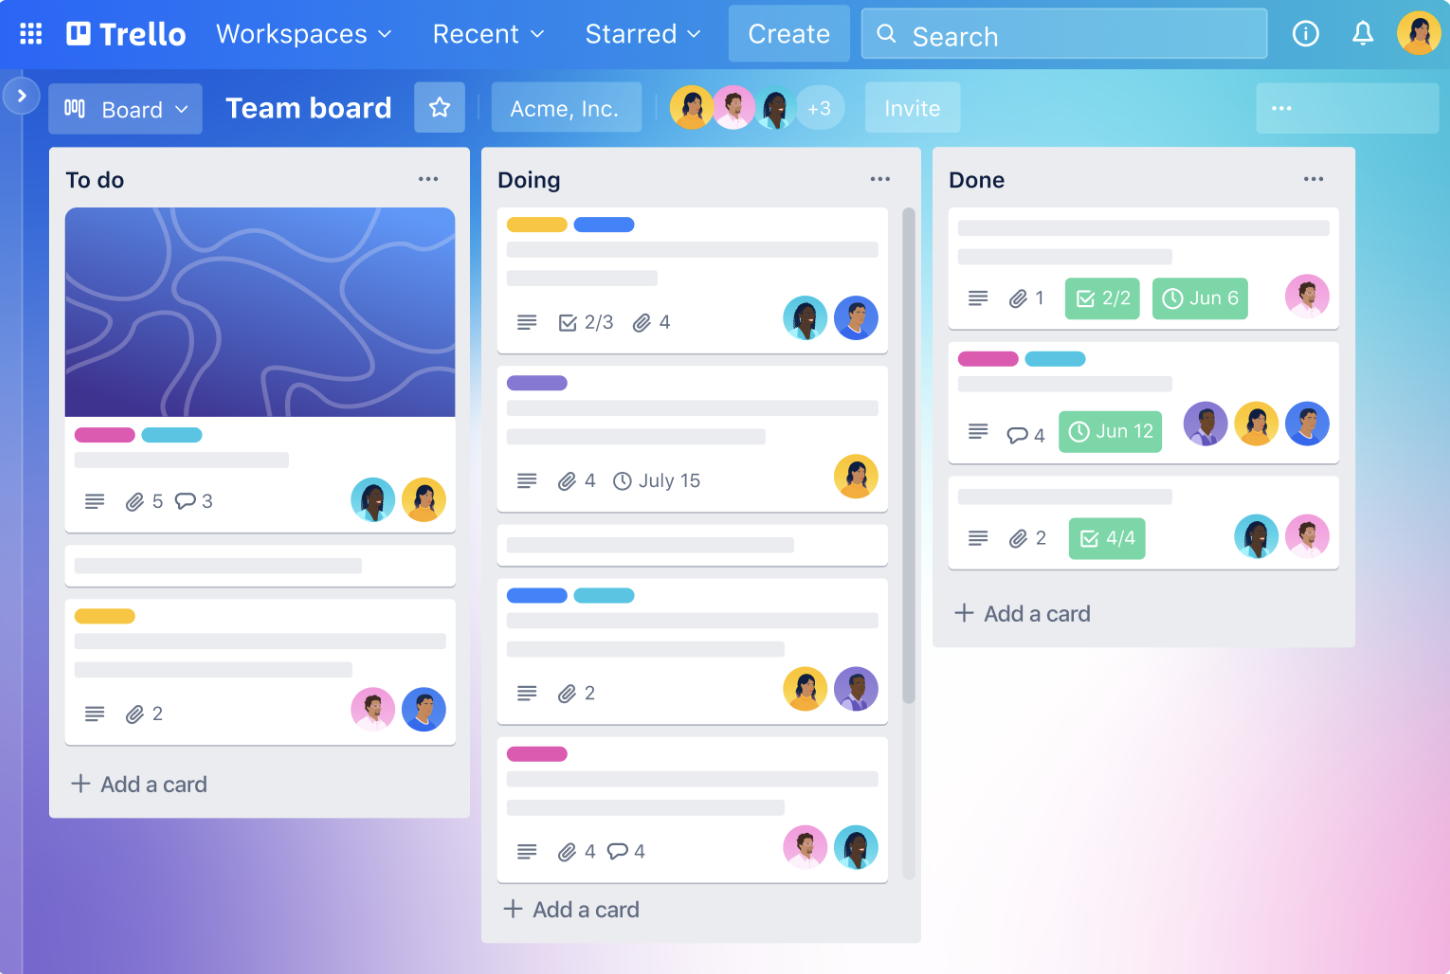 Project management tools like Trello help you organize and collaborate on projects that are part of your marketing strategy.